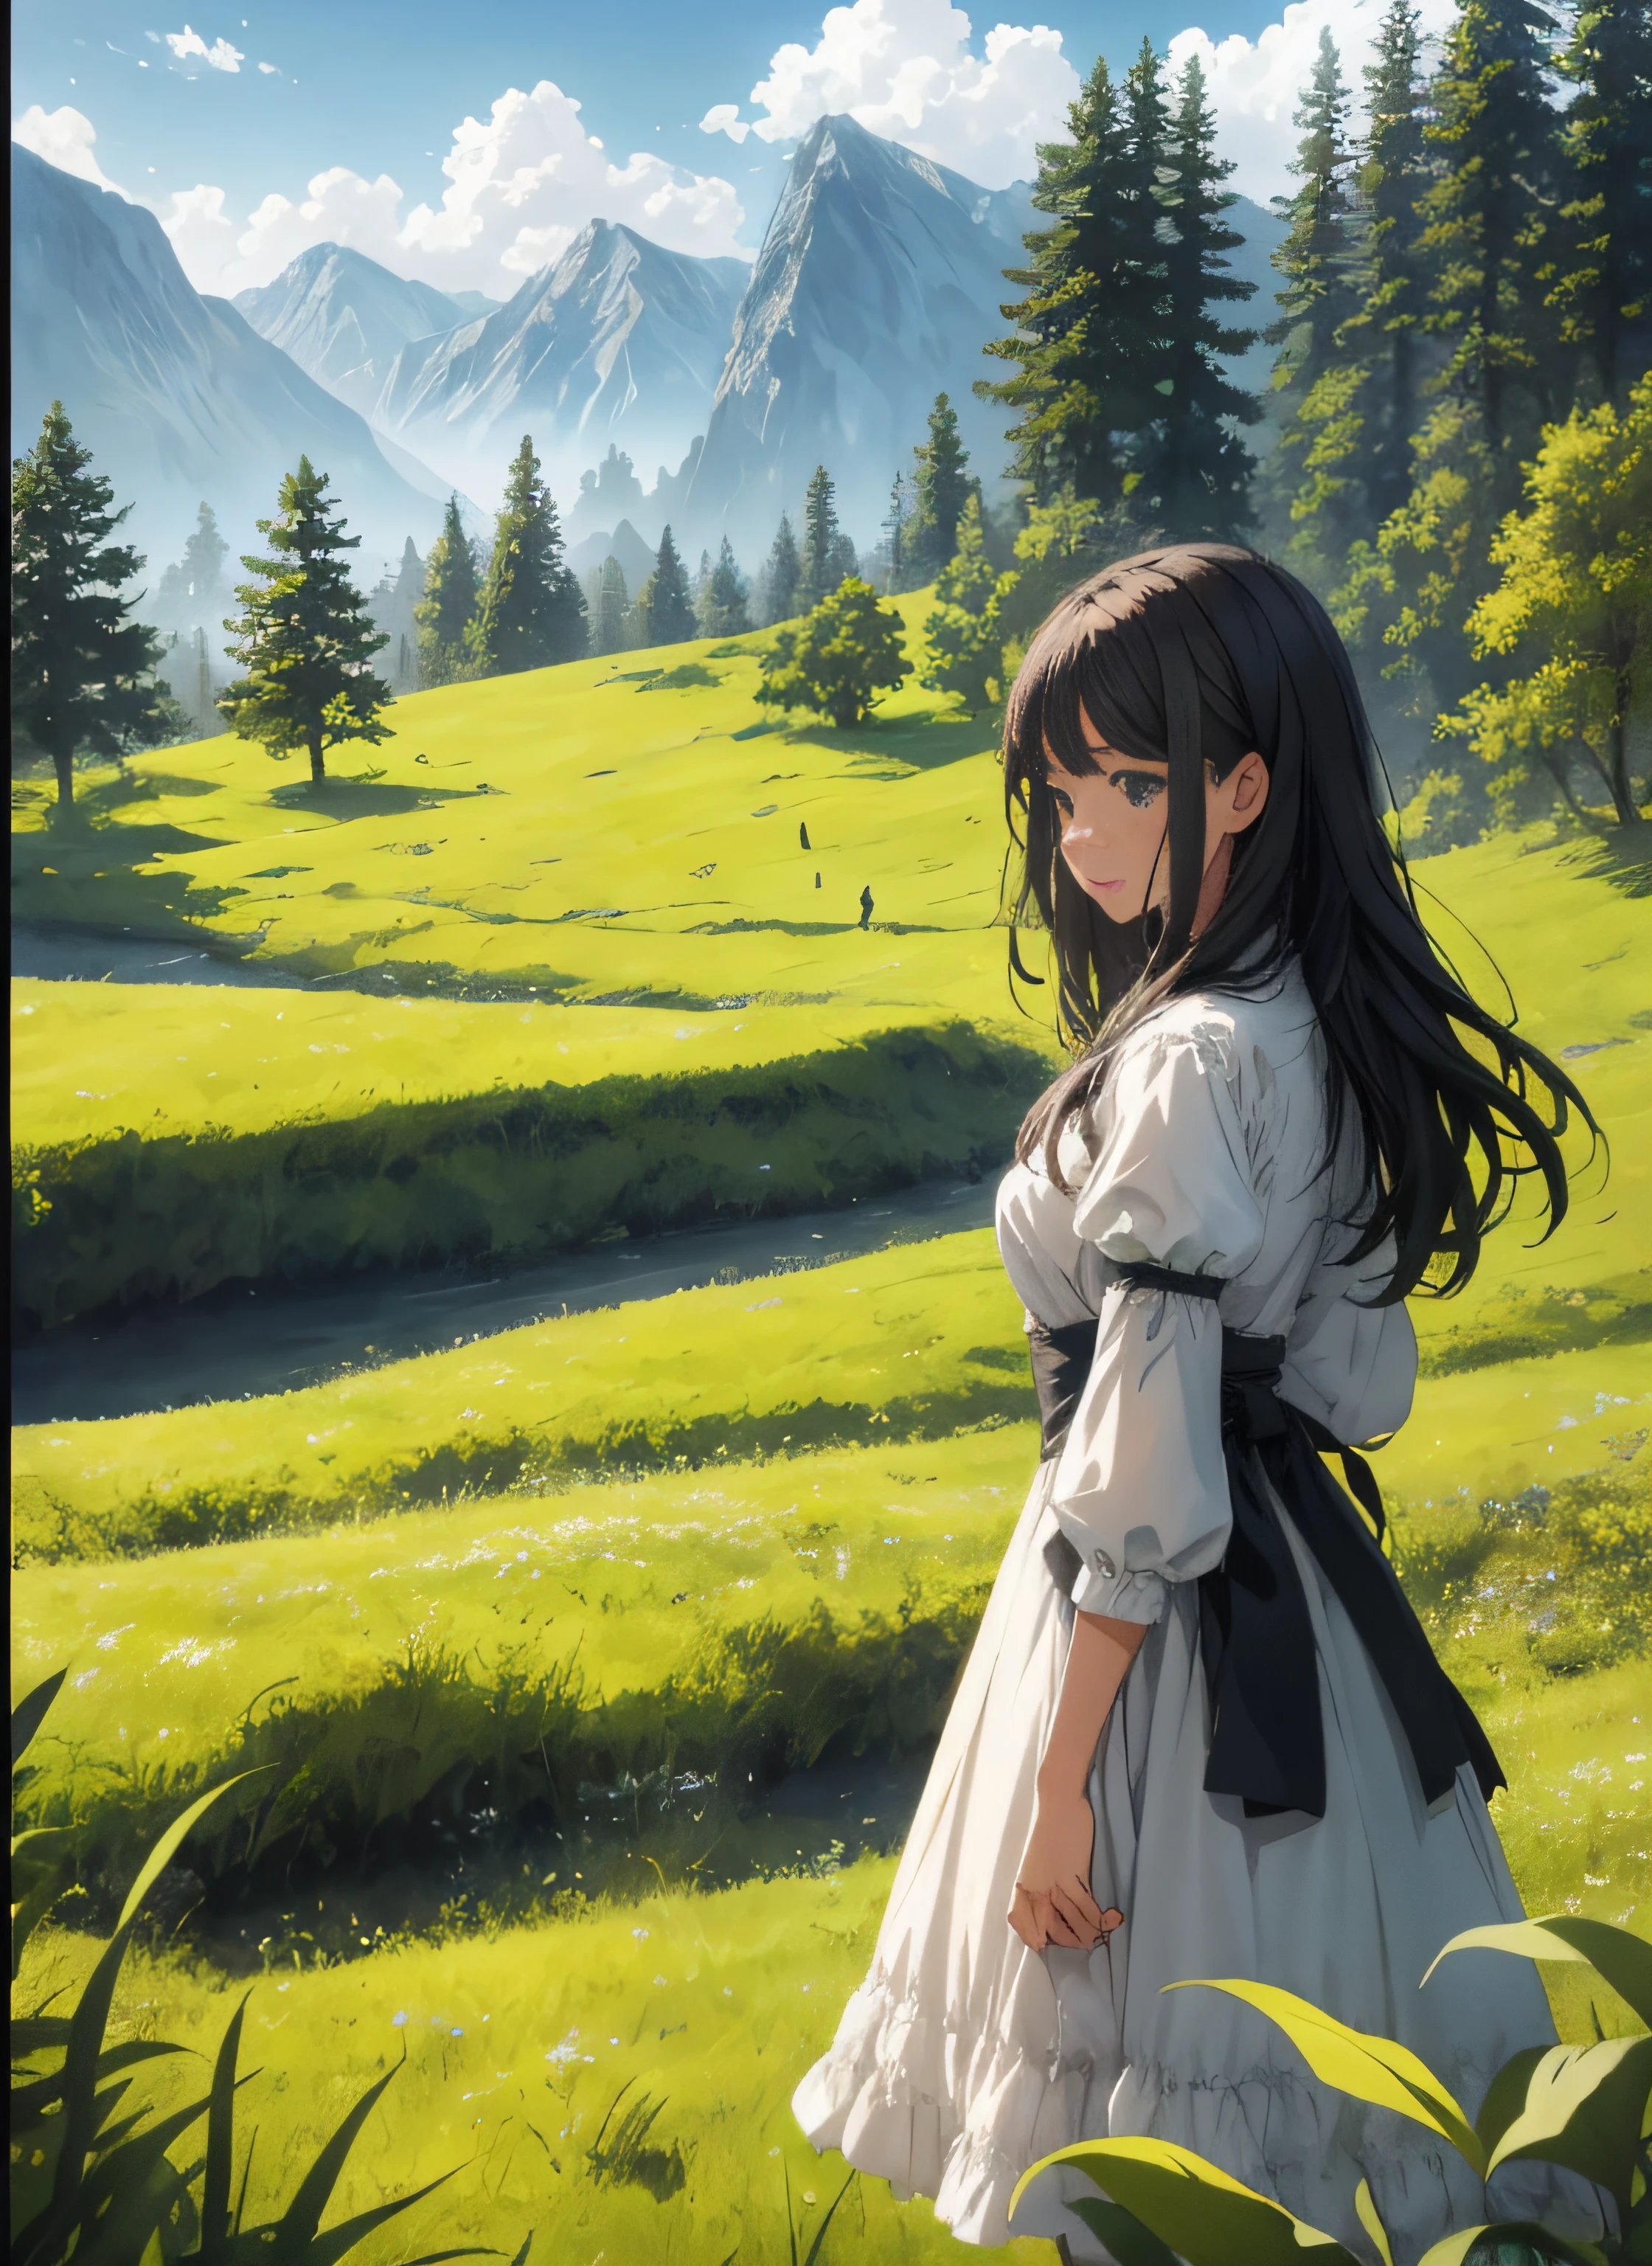 Anime girl in field with mountains as background, Anime Nature, beautiful anime scenes, anime countryside landscape, 4k manga wallpapers, Guviz-style artwork, anime nature wallpap, 4K anime wallpaper, makoto shinkai art style, Beautiful anime, beautiful anime scenery, Beautiful anime artwork, Anime landscape, Anime art wallpaper 8 K